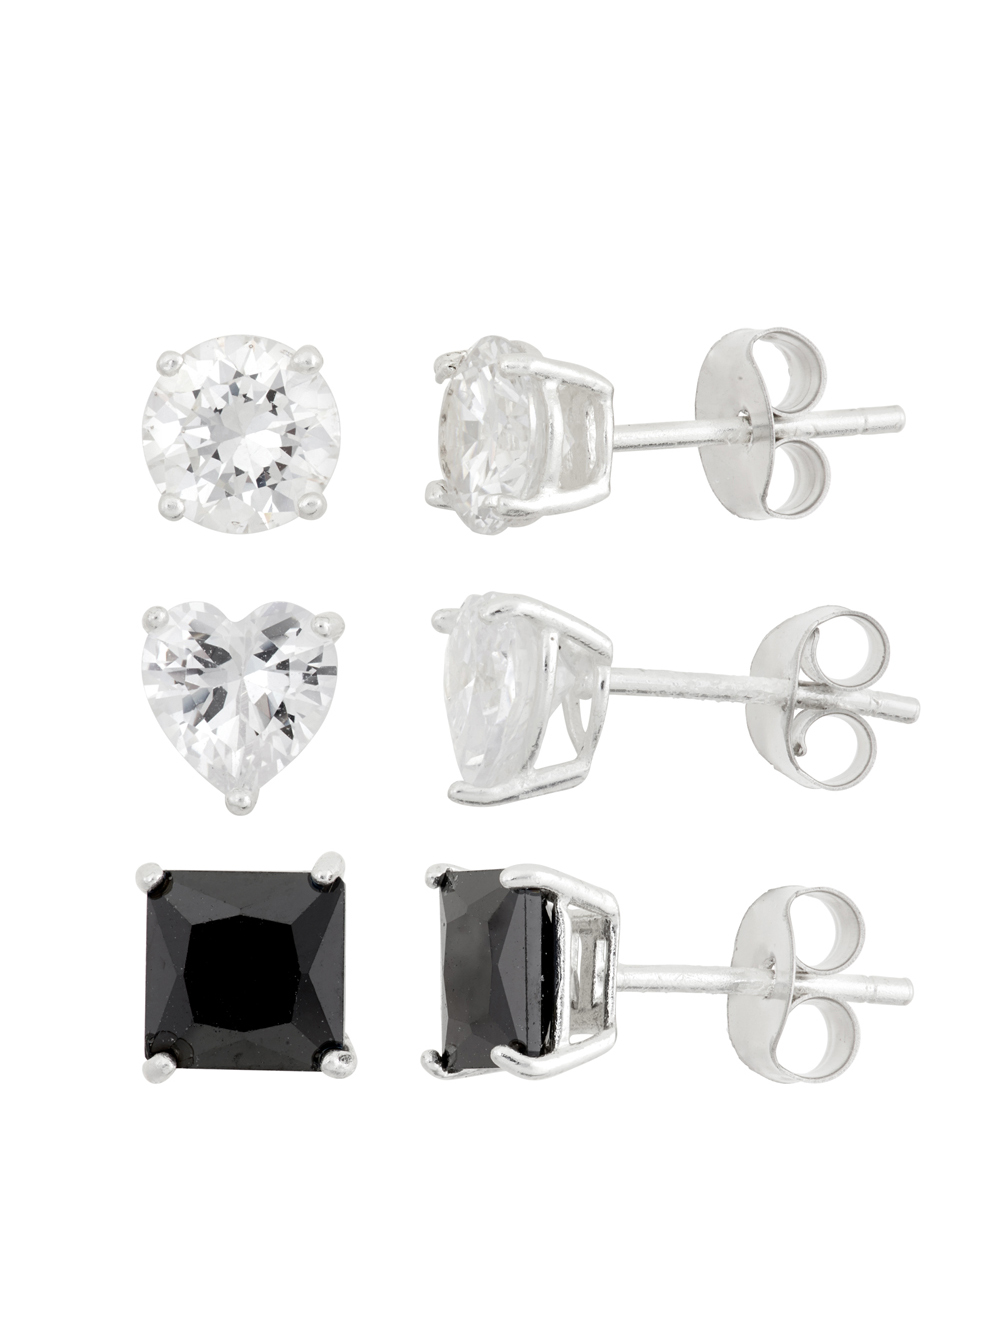 Forever New White Cubic Zirconia 5mm Round Bezel-Set Sterling Silver Stud Earrings - image 1 of 4